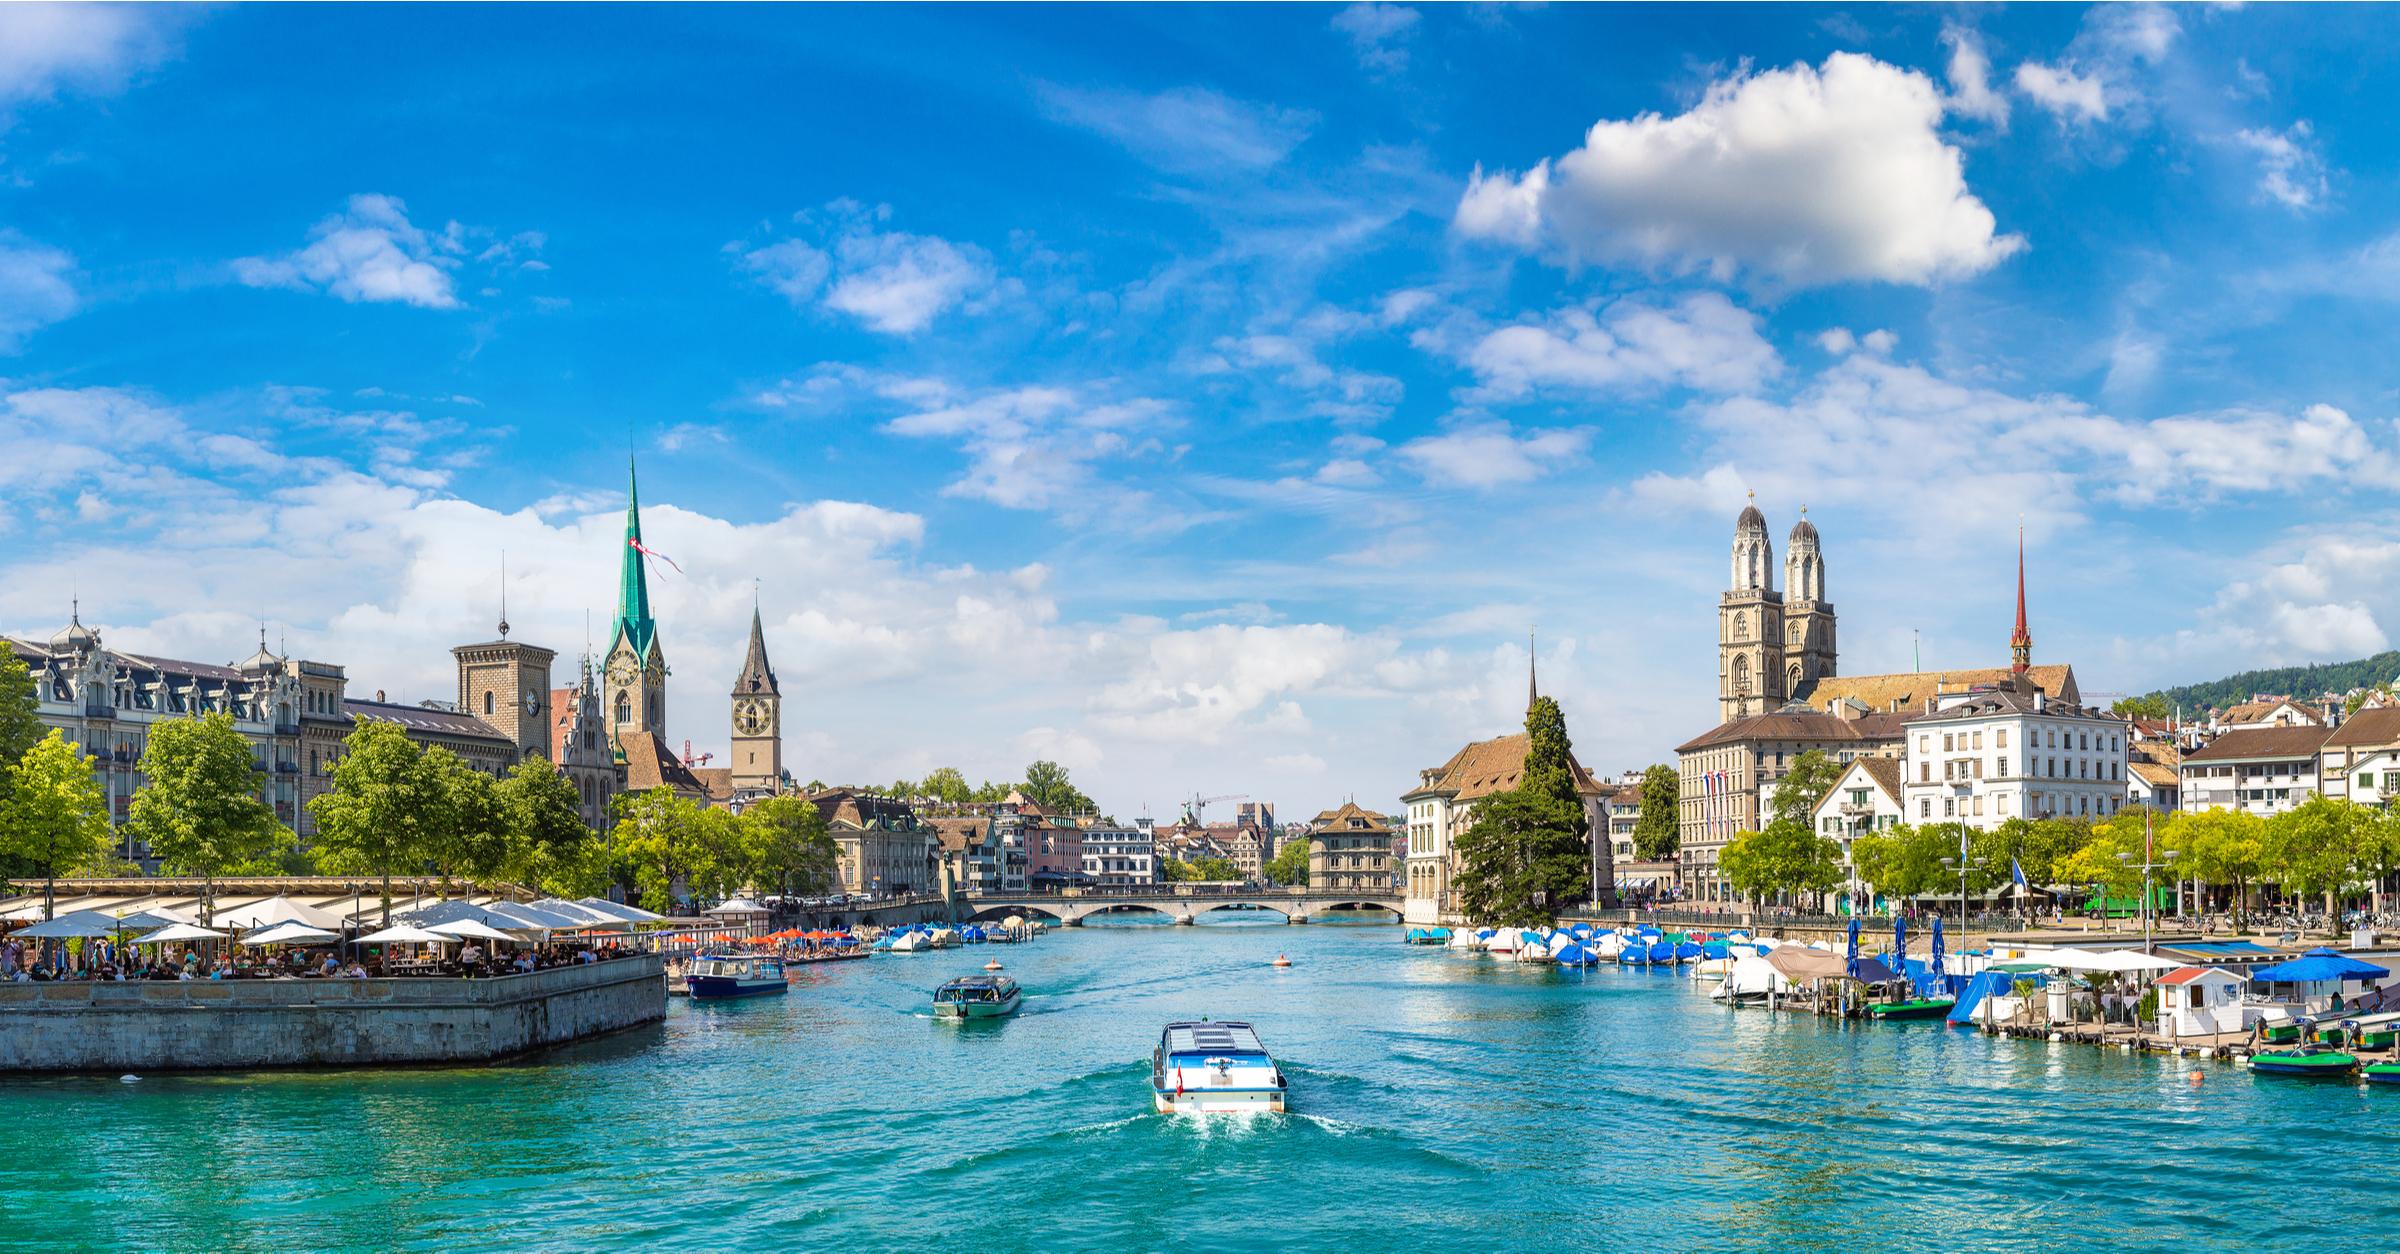 How to make the most of your summer in Zurich